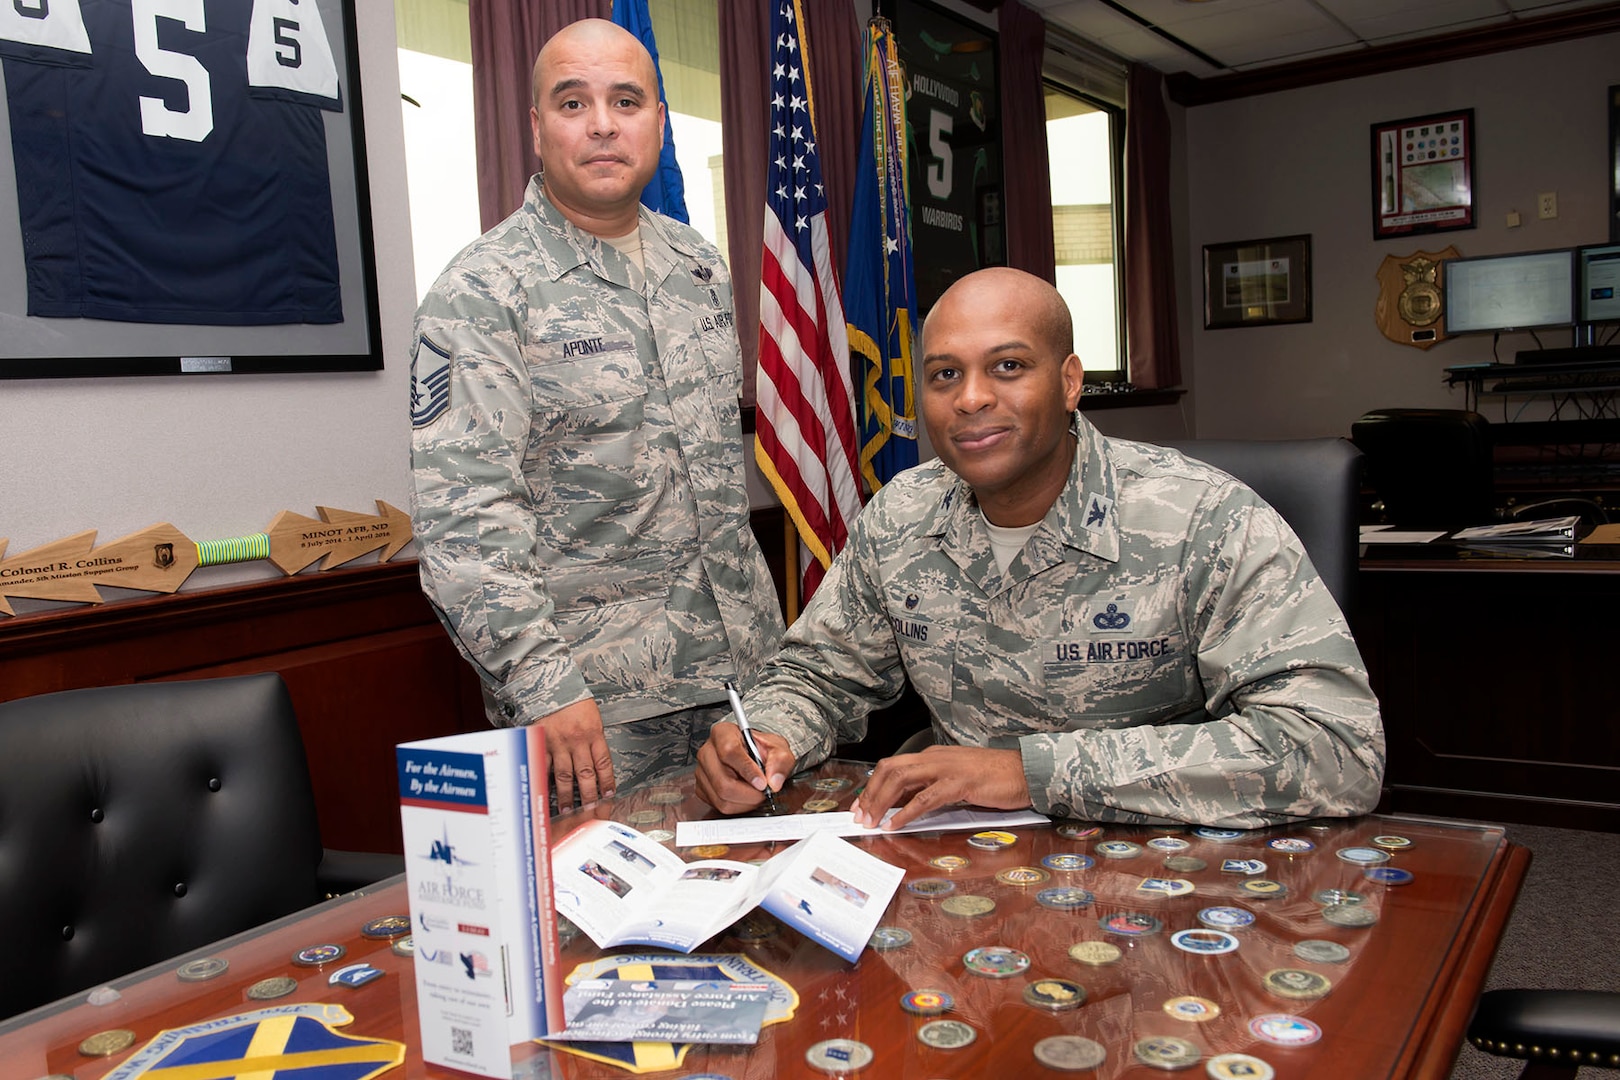 Col. Roy Collins, 37th Training Wing commander (seated) signs a contribution slip for the Air Force Assistance Fund as Master Sgt. Joseph Aponte, 323rd Training Squadron military training instructor and project officer for the 37th TRW AFAF campaign, looks on April 10, at Joint Base San Antonio-Lackland. The AFAF campaign is comprised of four charities, Air Force Villages Inc., Air Force Aid Society Inc., Air Force Enlisted Village Inc. and the General and Mrs. Curtis E. LeMay Foundation, which solely assists active duty, reserve and retired Airmen and their families. The various charities provide low to no-cost retirement homes for Airmen and family members, emergency funds and travel arrangements, scholarships, grants and more. (U.S. Air Force photo by Staff Sgt. Marissa Garner)